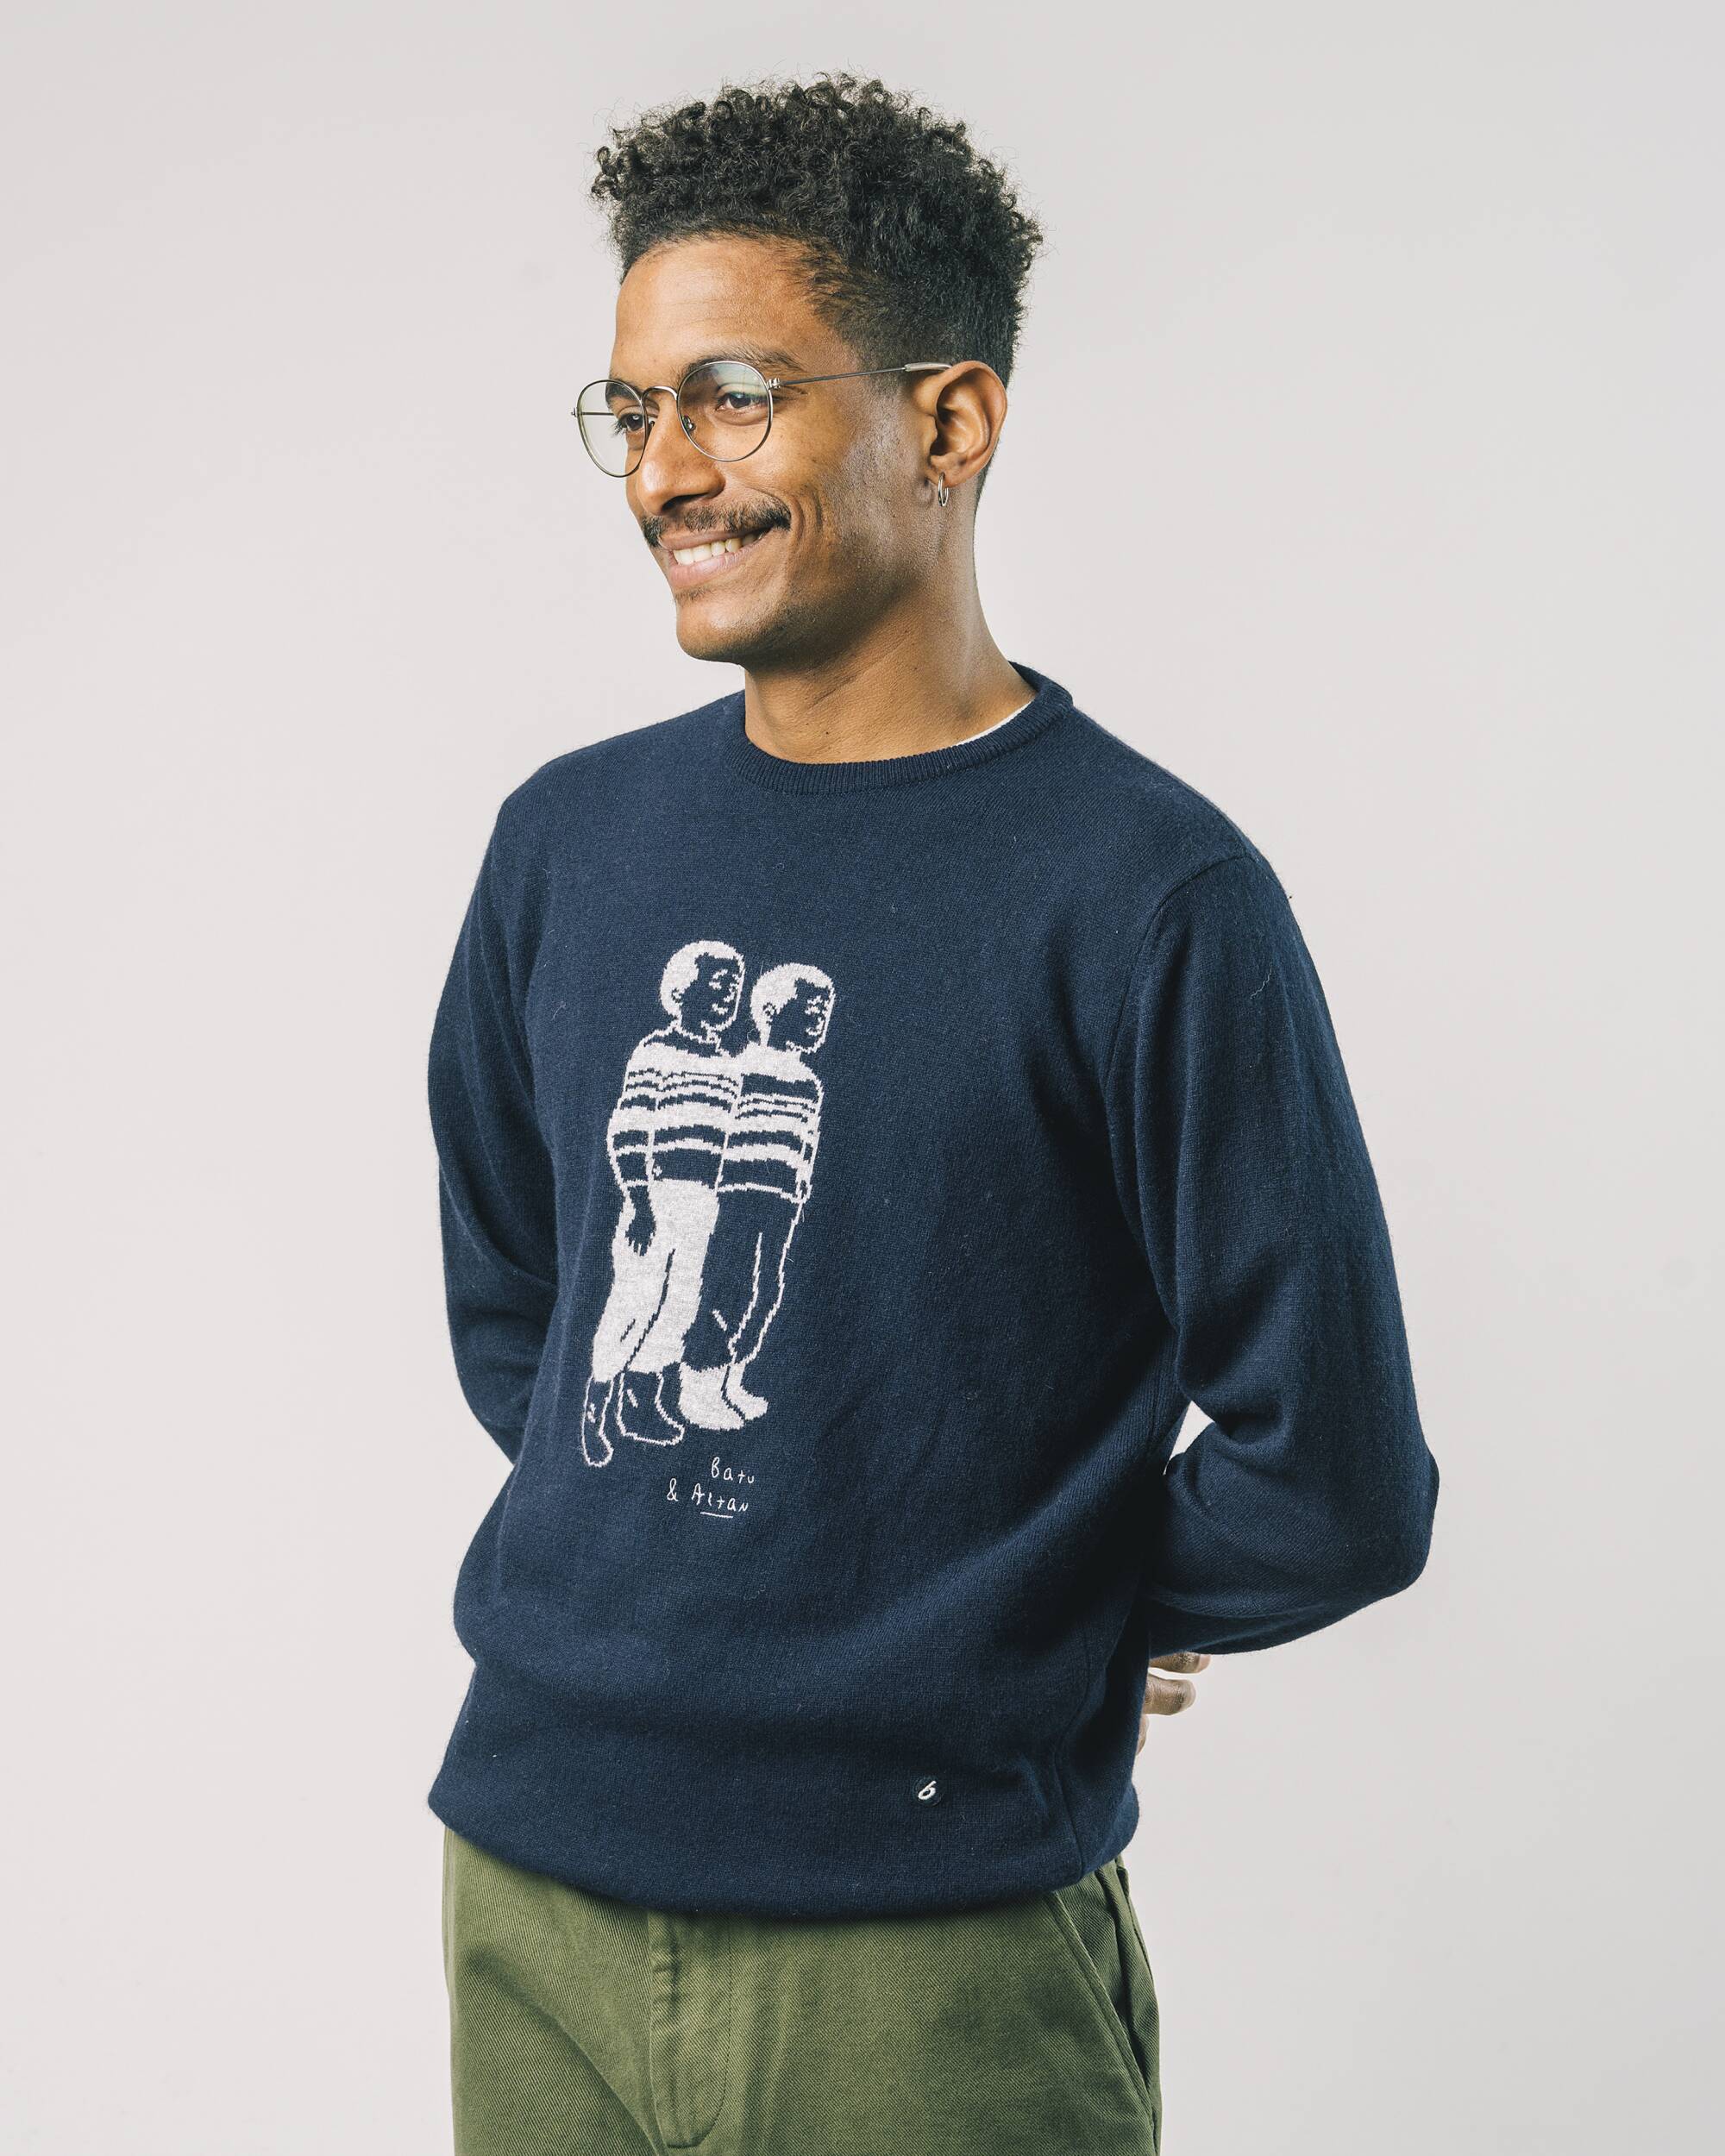 Sweatshirt "Twins" in navy - blue made from 100% recycled material from Brava Fabrics